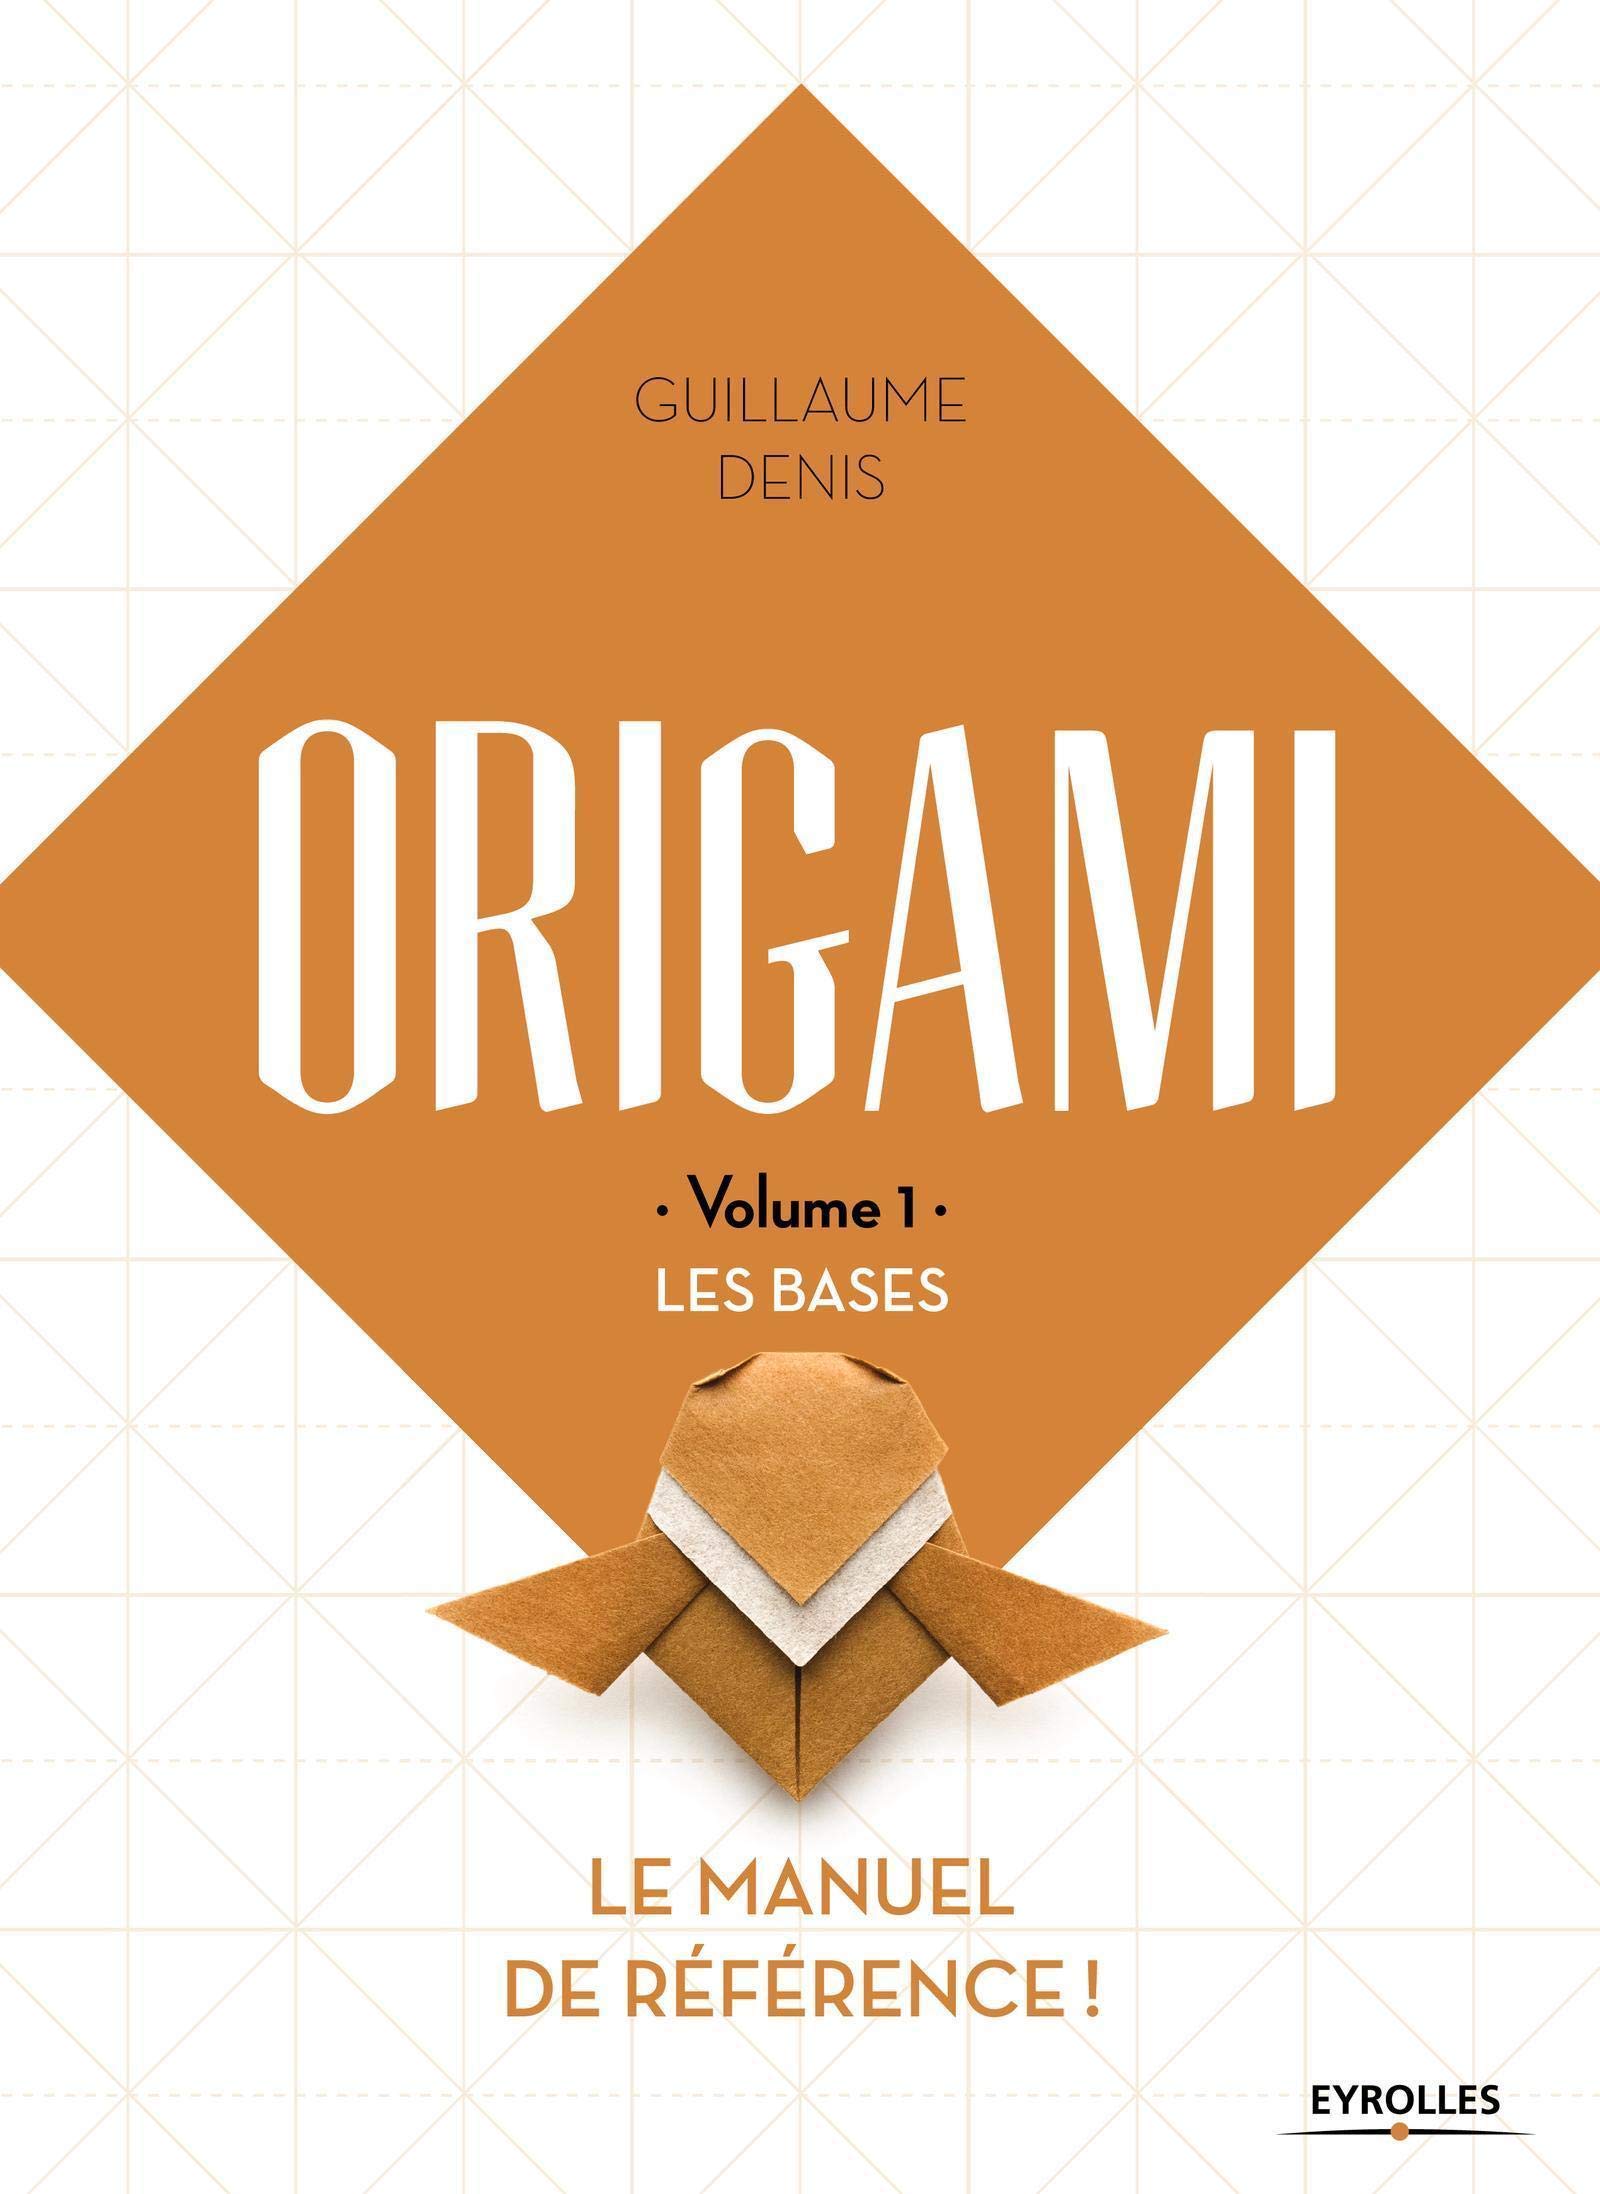 ORIGAMI - Volume 1 - LES BASES : page 173.